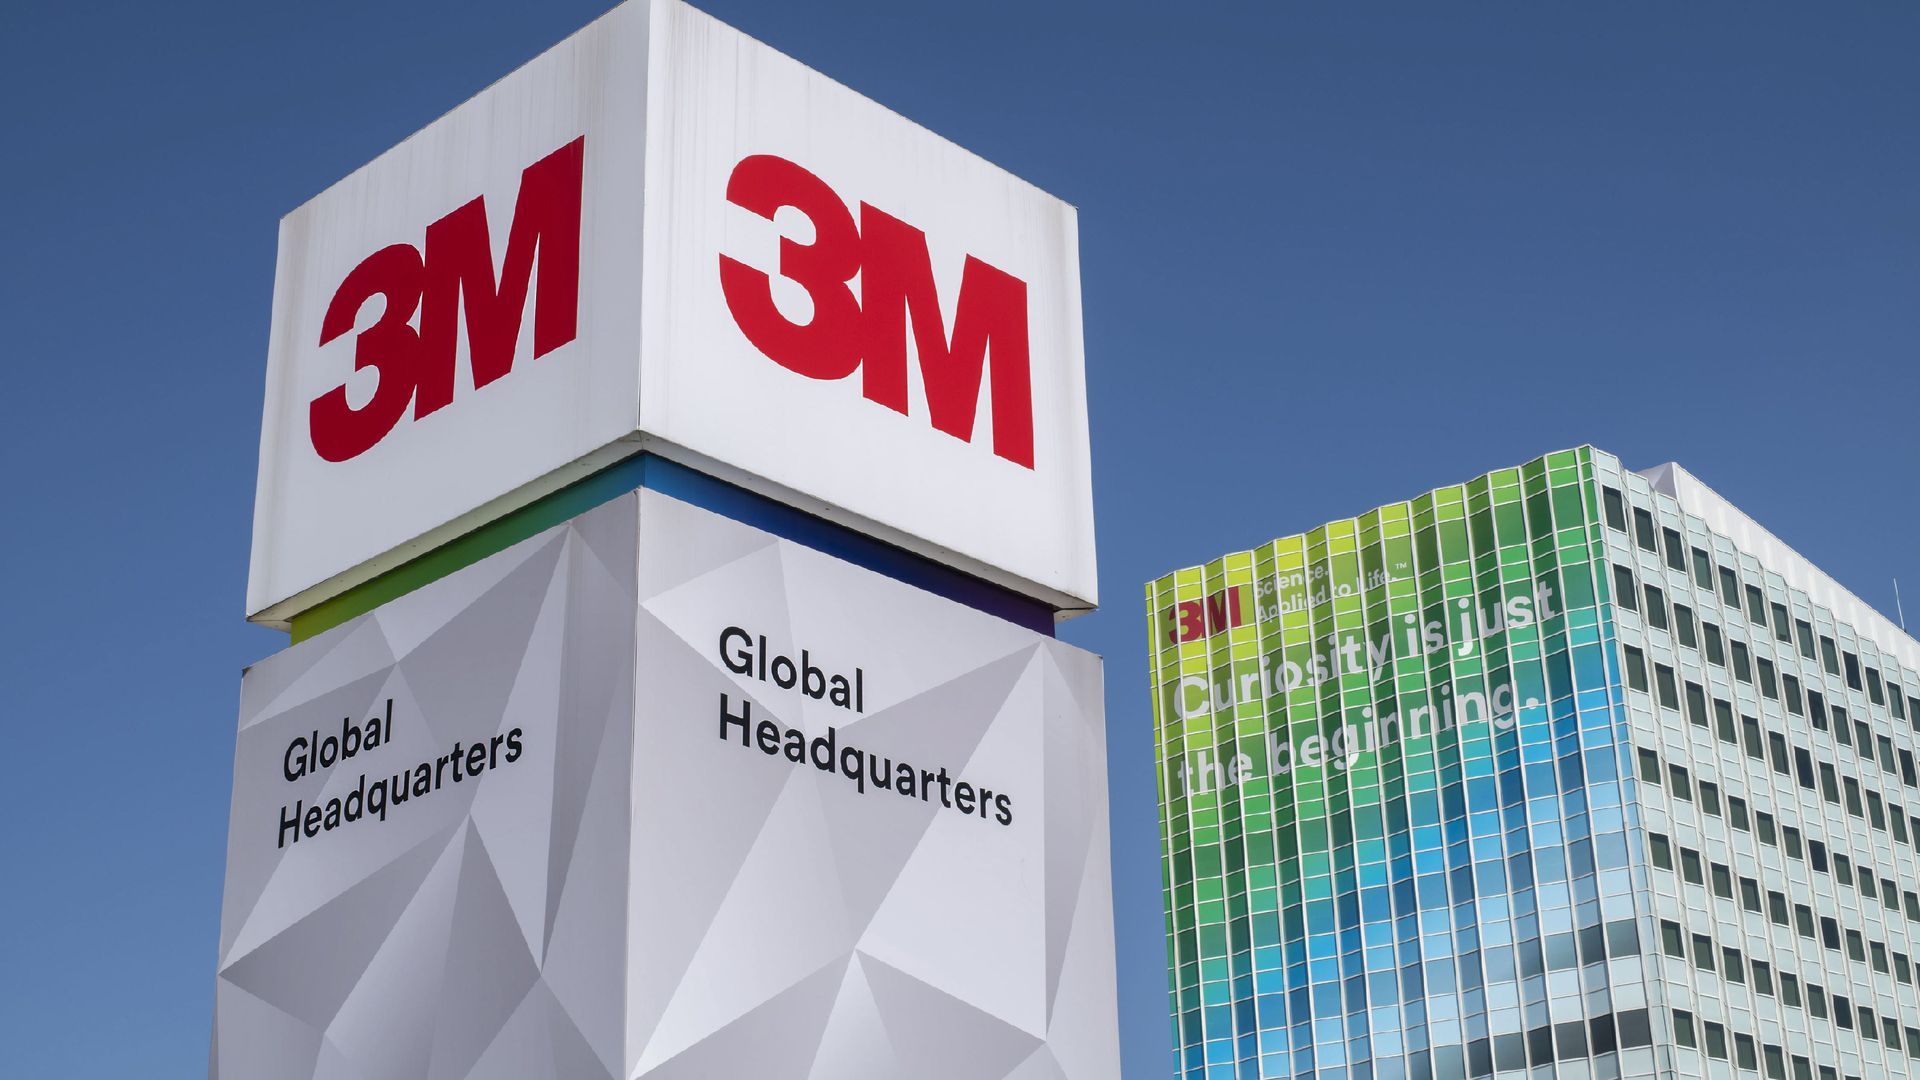 A view of 3M headquarters.